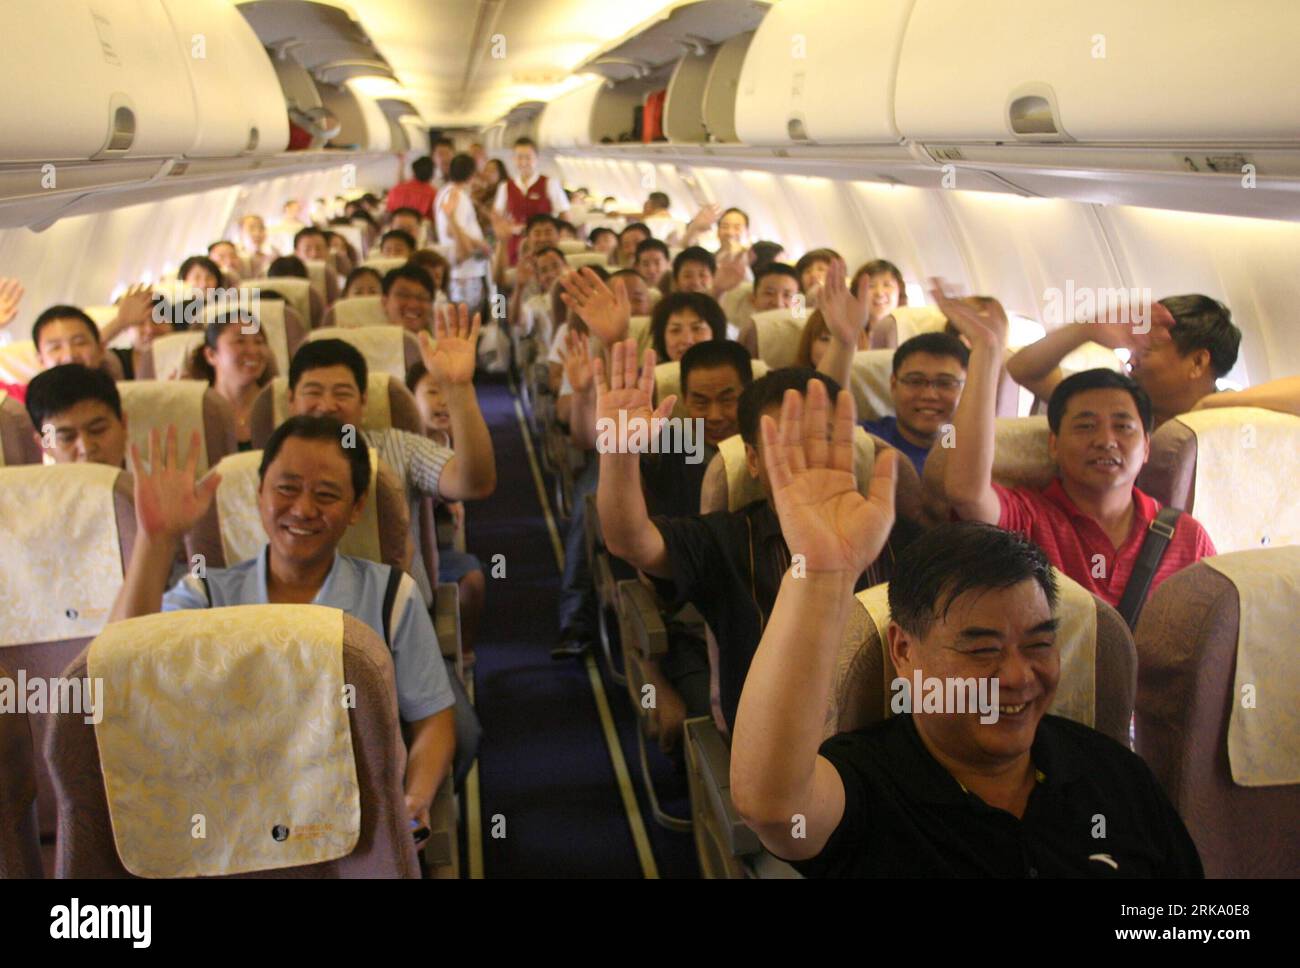 Bildnummer: 54248978  Datum: 23.07.2010  Copyright: imago/Xinhua (100723) -- JINAN, July 23, 2010 (Xinhua) -- Passengers wave their hands on the plane from Jinan to Taichung during a photo session on July 23, 2010. Shandong Airlines launched direct flights from Jinan to Taichung Friday, which is the sixth route between east China s Shandong Province and southeast China s Taiwan. The first flight reached Ching Chuan Kang Airport in Taichung at 10 o clock am. (Xinhua/Lu Chuanquan)(xzj) (3)CHINA-SHANGDONG-JINAN-TAIWAN-TAICHUNG-DIRECT FLIGHT(CN) PUBLICATIONxNOTxINxCHN Gesellschaft Verkehr Luftfahr Stock Photo